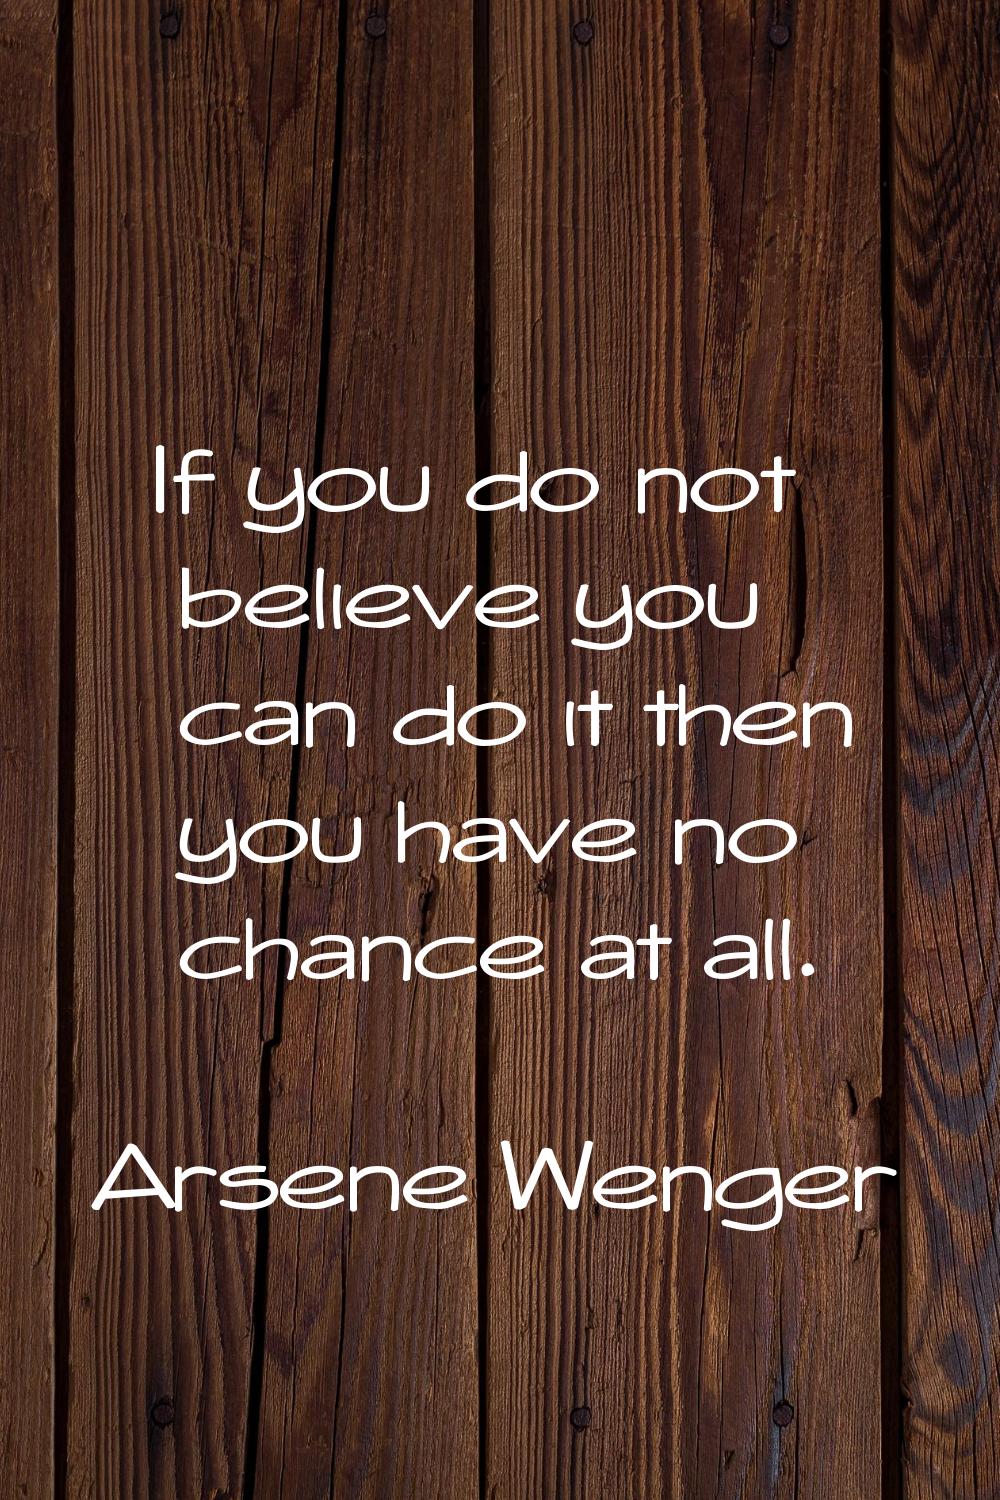 If you do not believe you can do it then you have no chance at all.